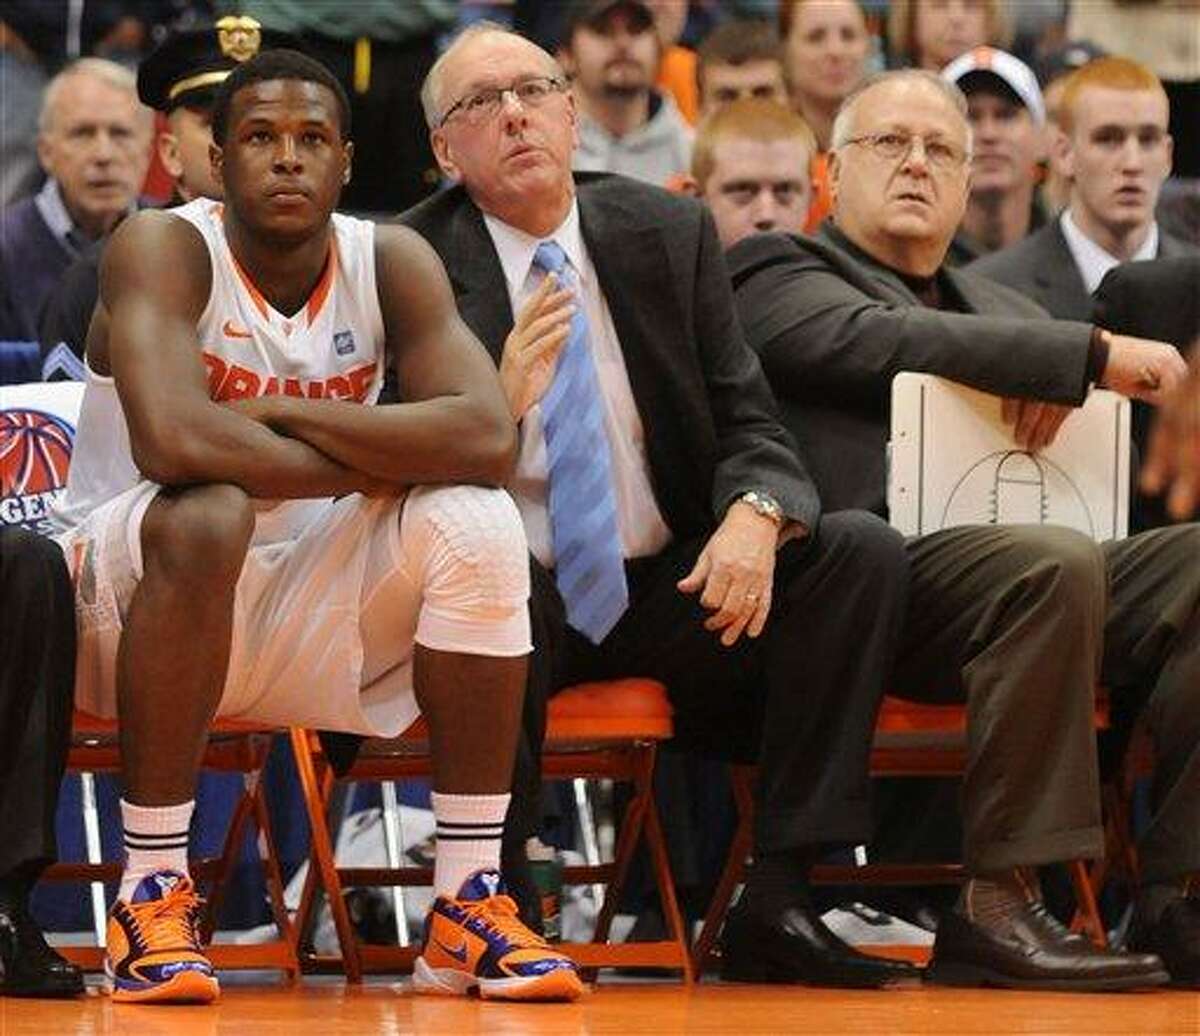 In this Nov. 21, 2010 file photo, Syracuse basketball player Dion Waiter, left, sits on the bench beside head coach Jim Boeheim, center, and assistant coach Bernie Fine, right, during a game against William & Mary, in Syracuse, N.Y. Fine was placed on administrative leave Thursday, Nov. 17, 2011 after old child molesting allegations resurfaced, just two weeks after a child sex abuse scandal rocked Penn State. (AP Photo/The Post Standard, Dennis Nett) INTERNET OUT TV OUT MAGS OUT NO ARCHIVE